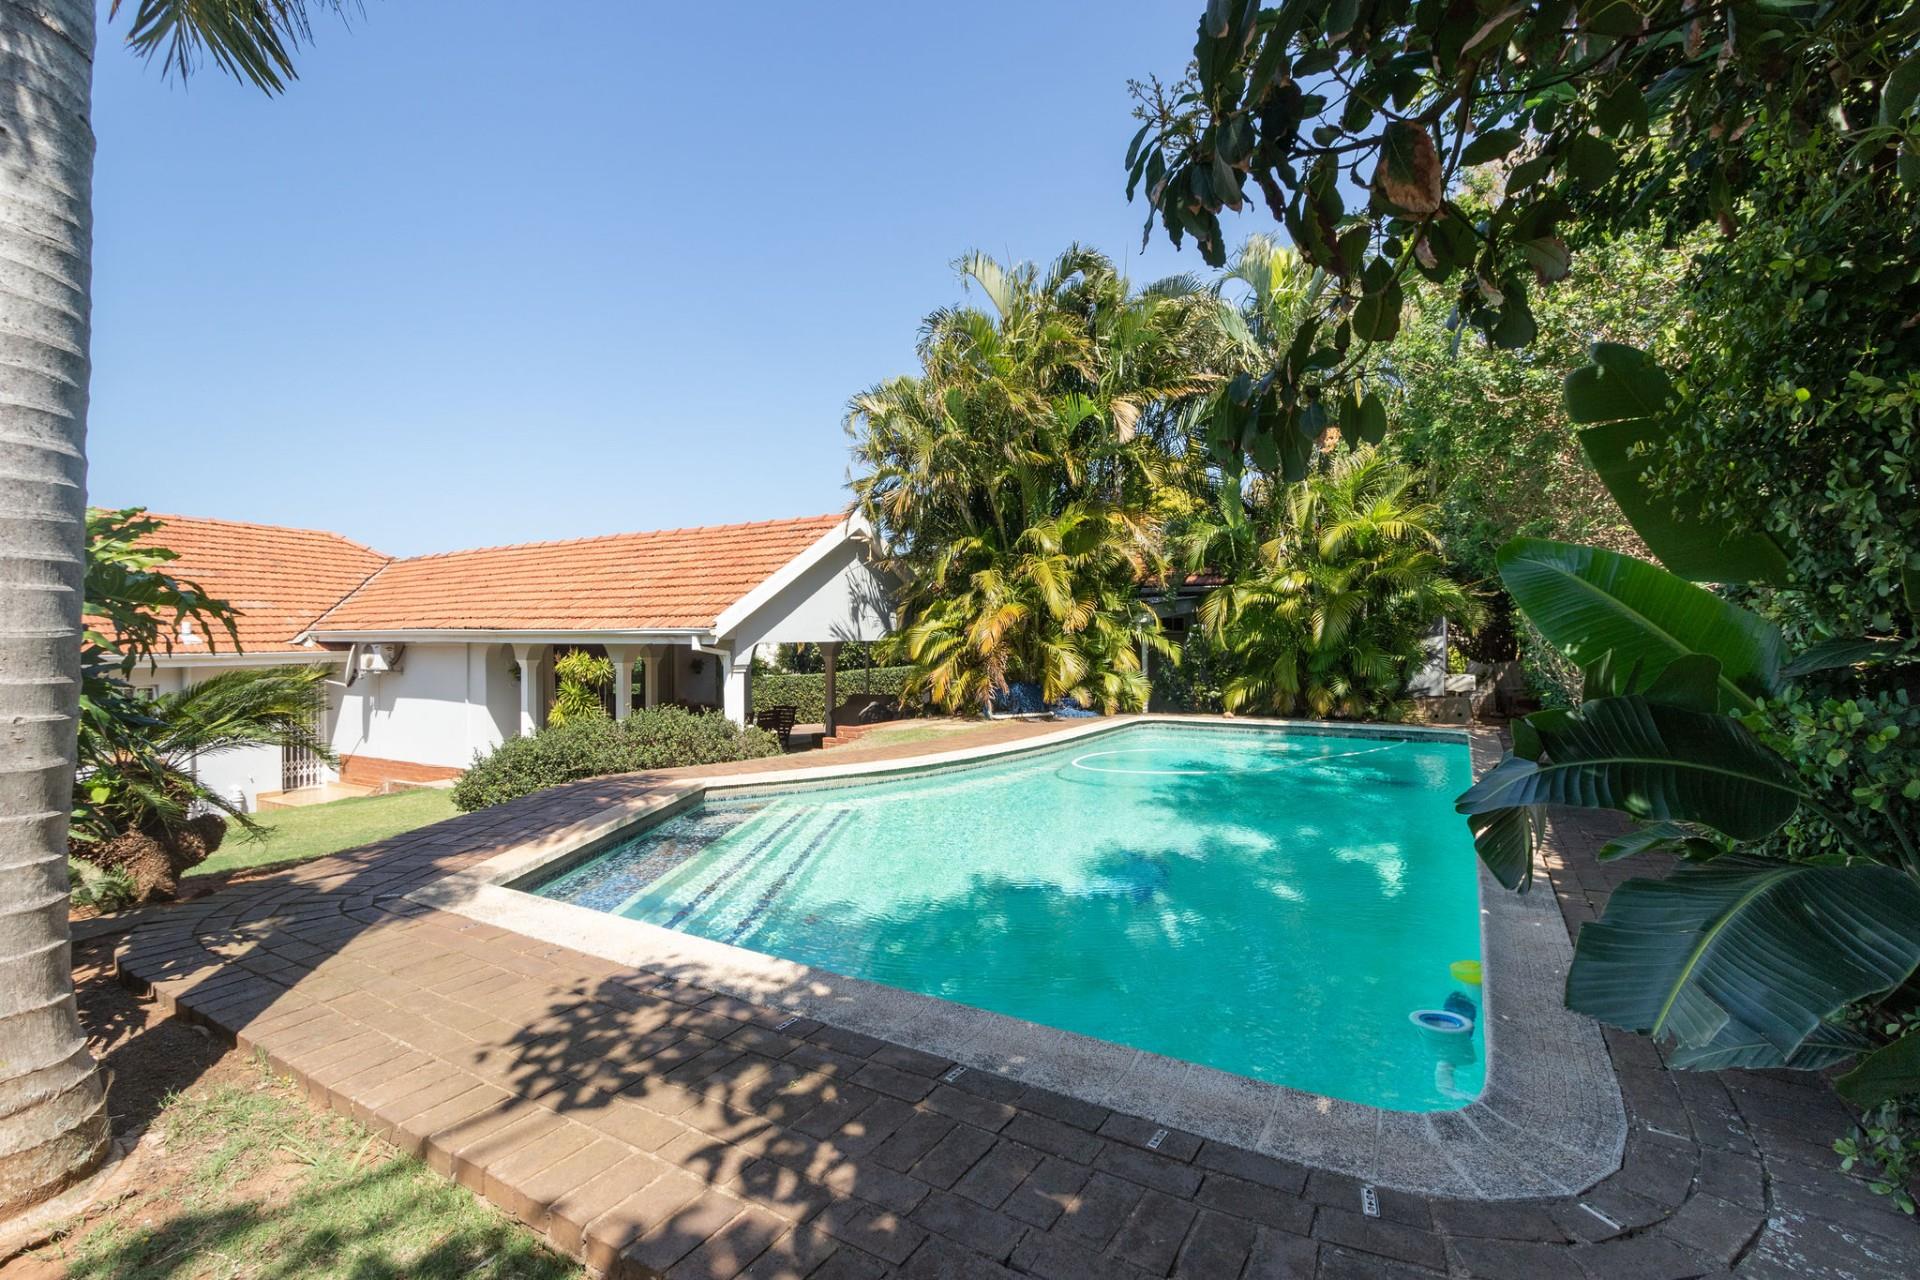 3 Bedroom House For Sale in Durban North | RE/MAX™ of Southern Africa